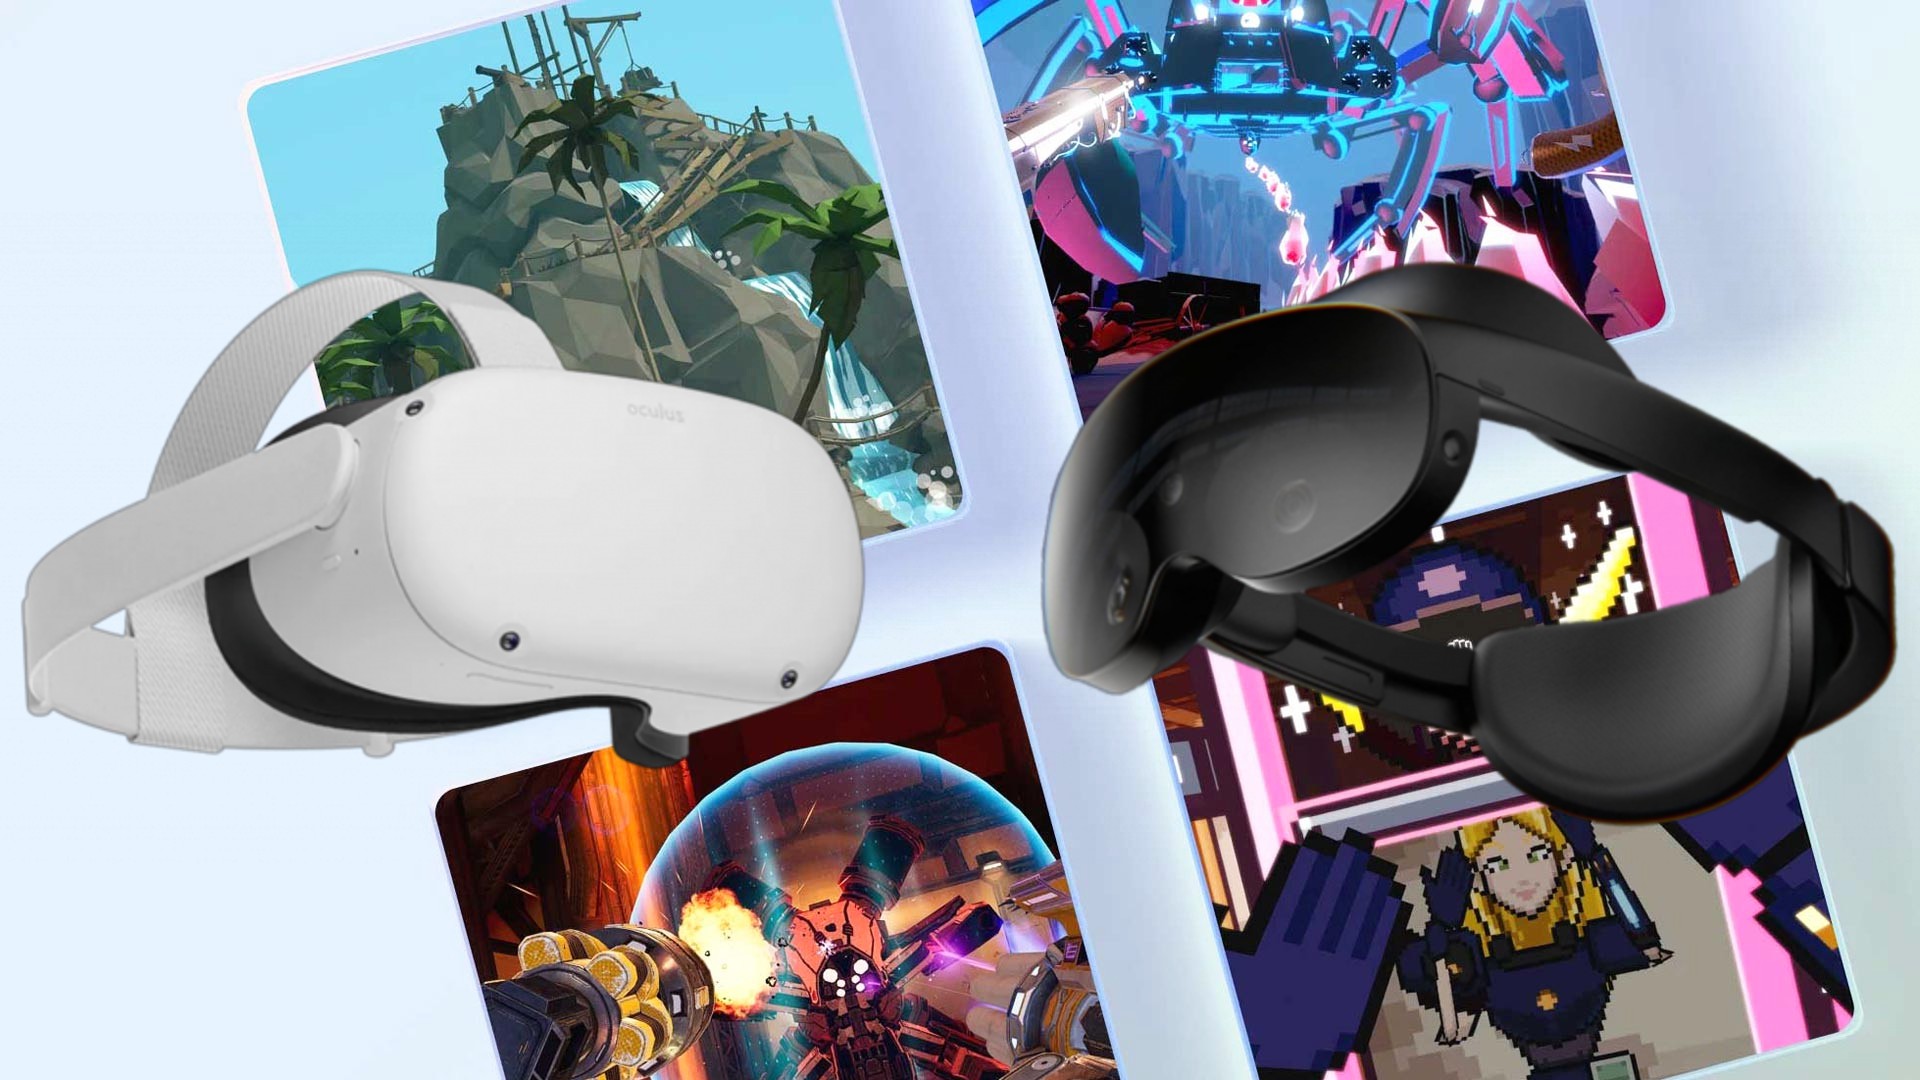 The latest Humble Bundle collects top VR games for cheap